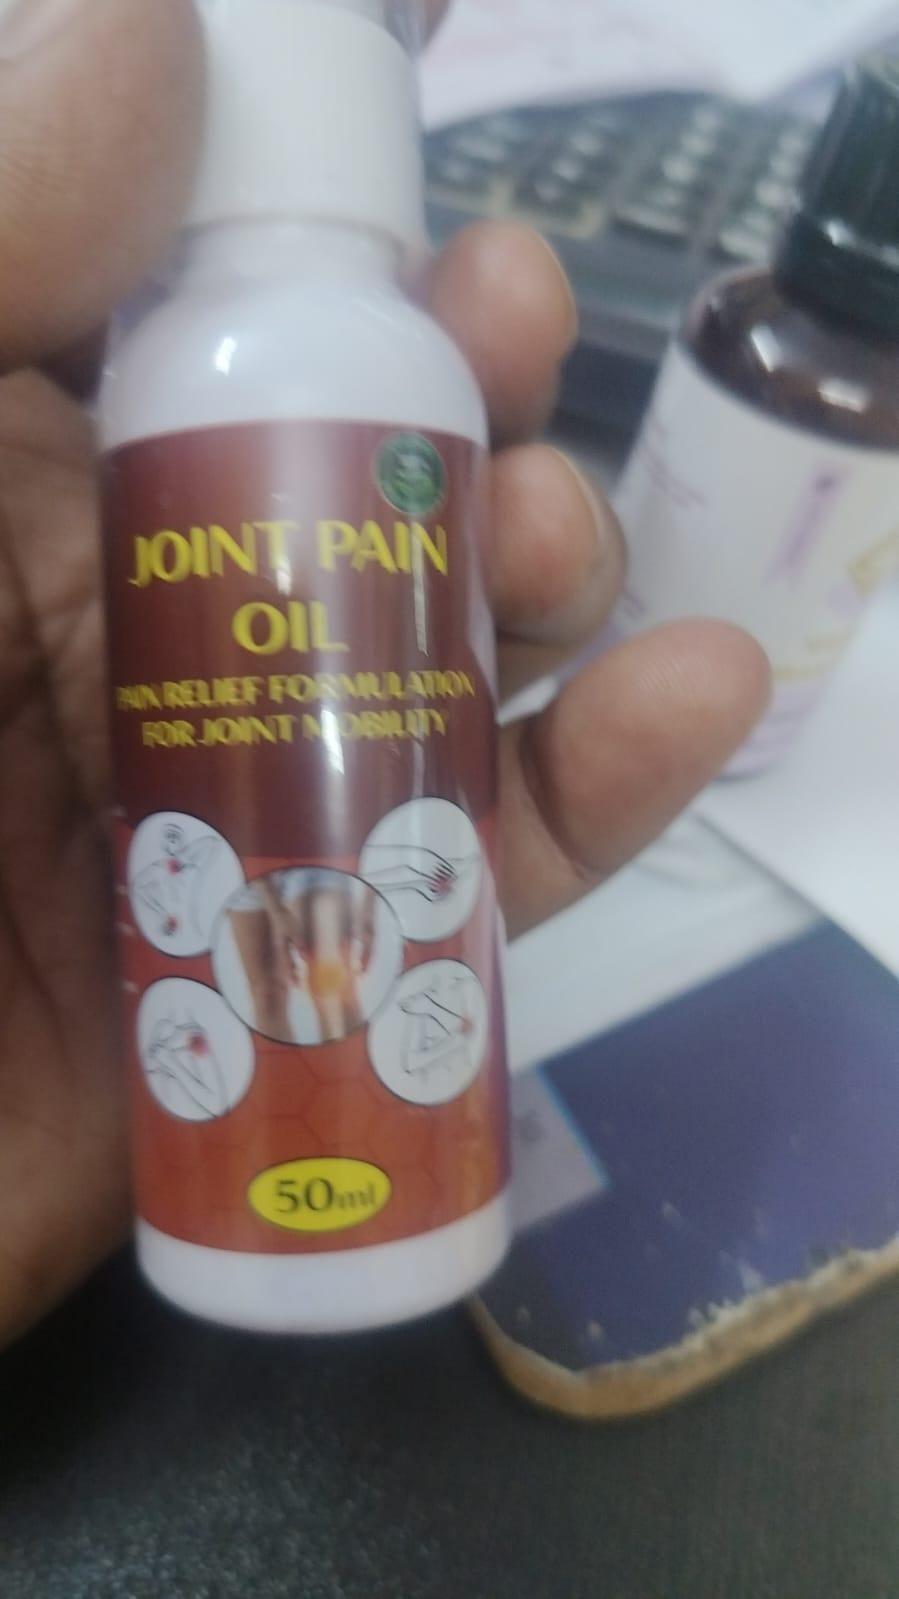 Joint Pain Oil Pack of 2 - Deal IND.